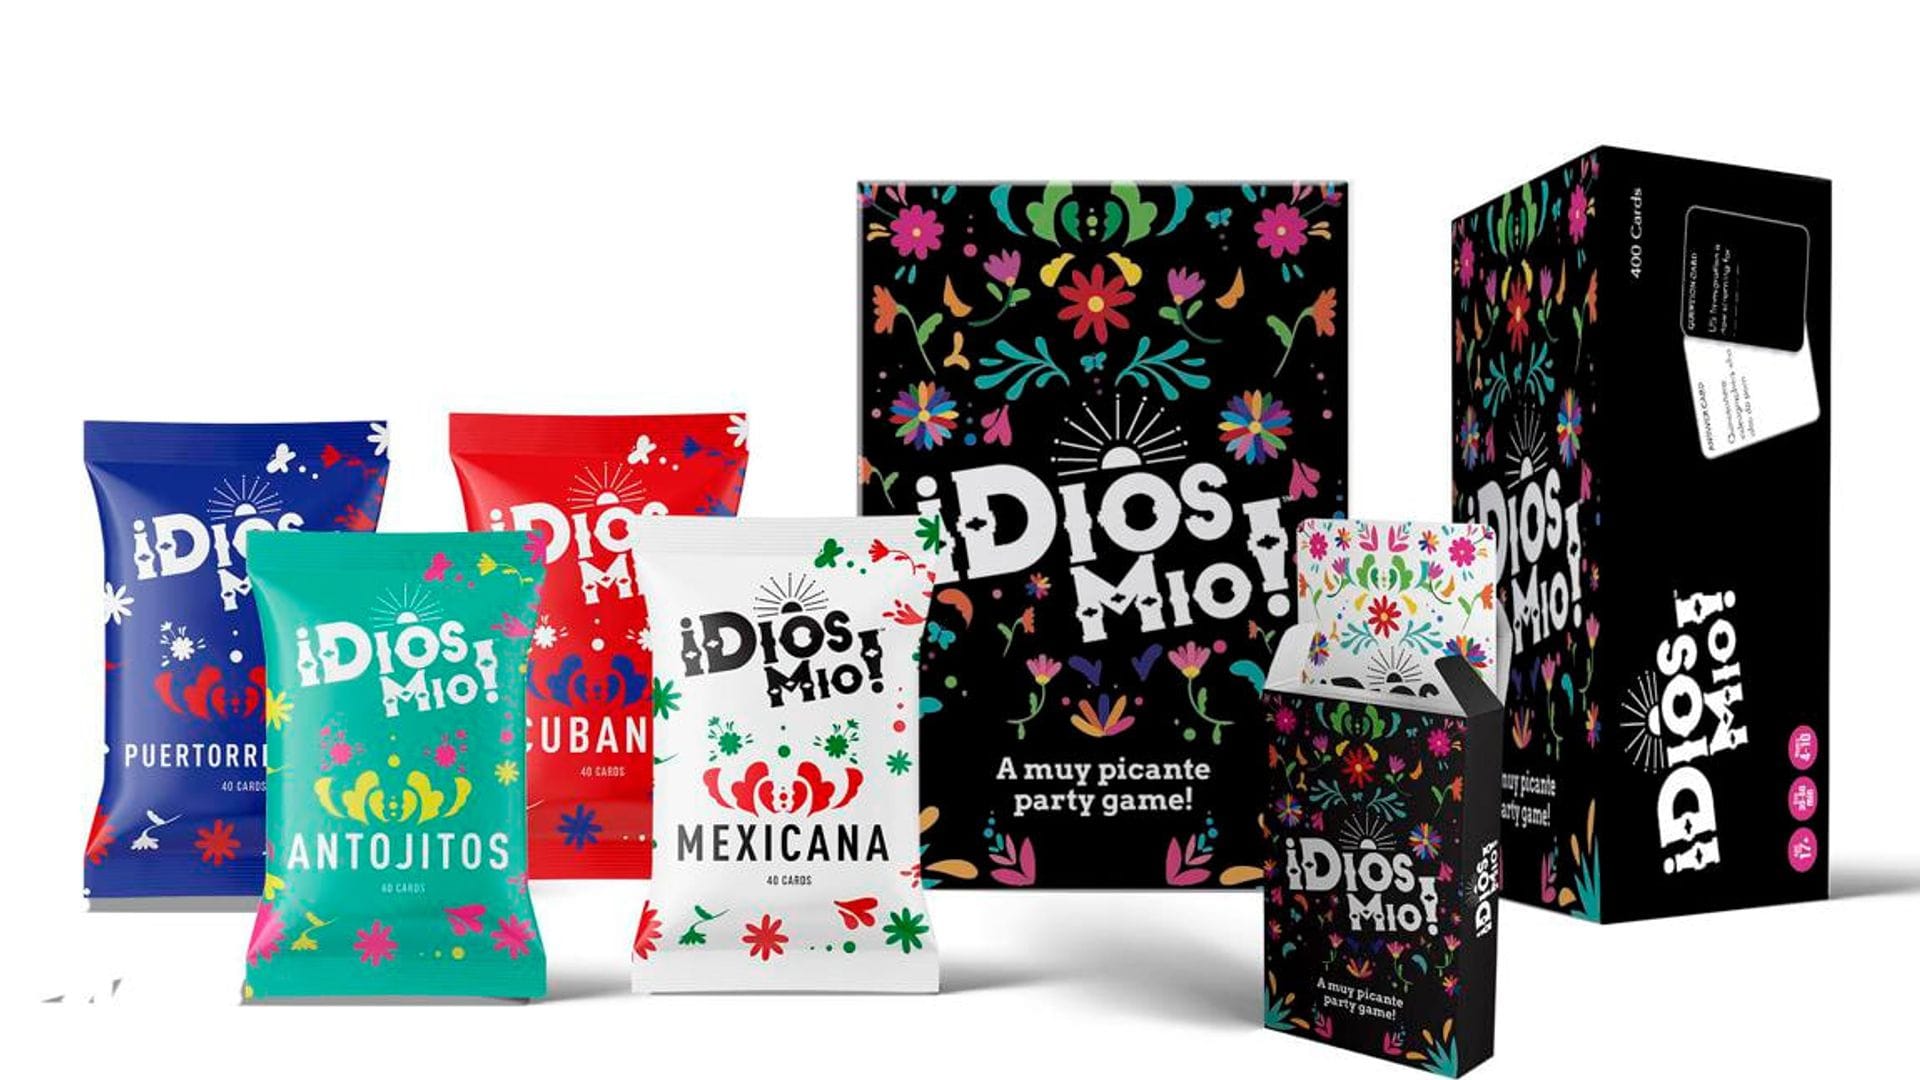 ¡Dios Mio! The first bilingual card game made for the Latinx Community